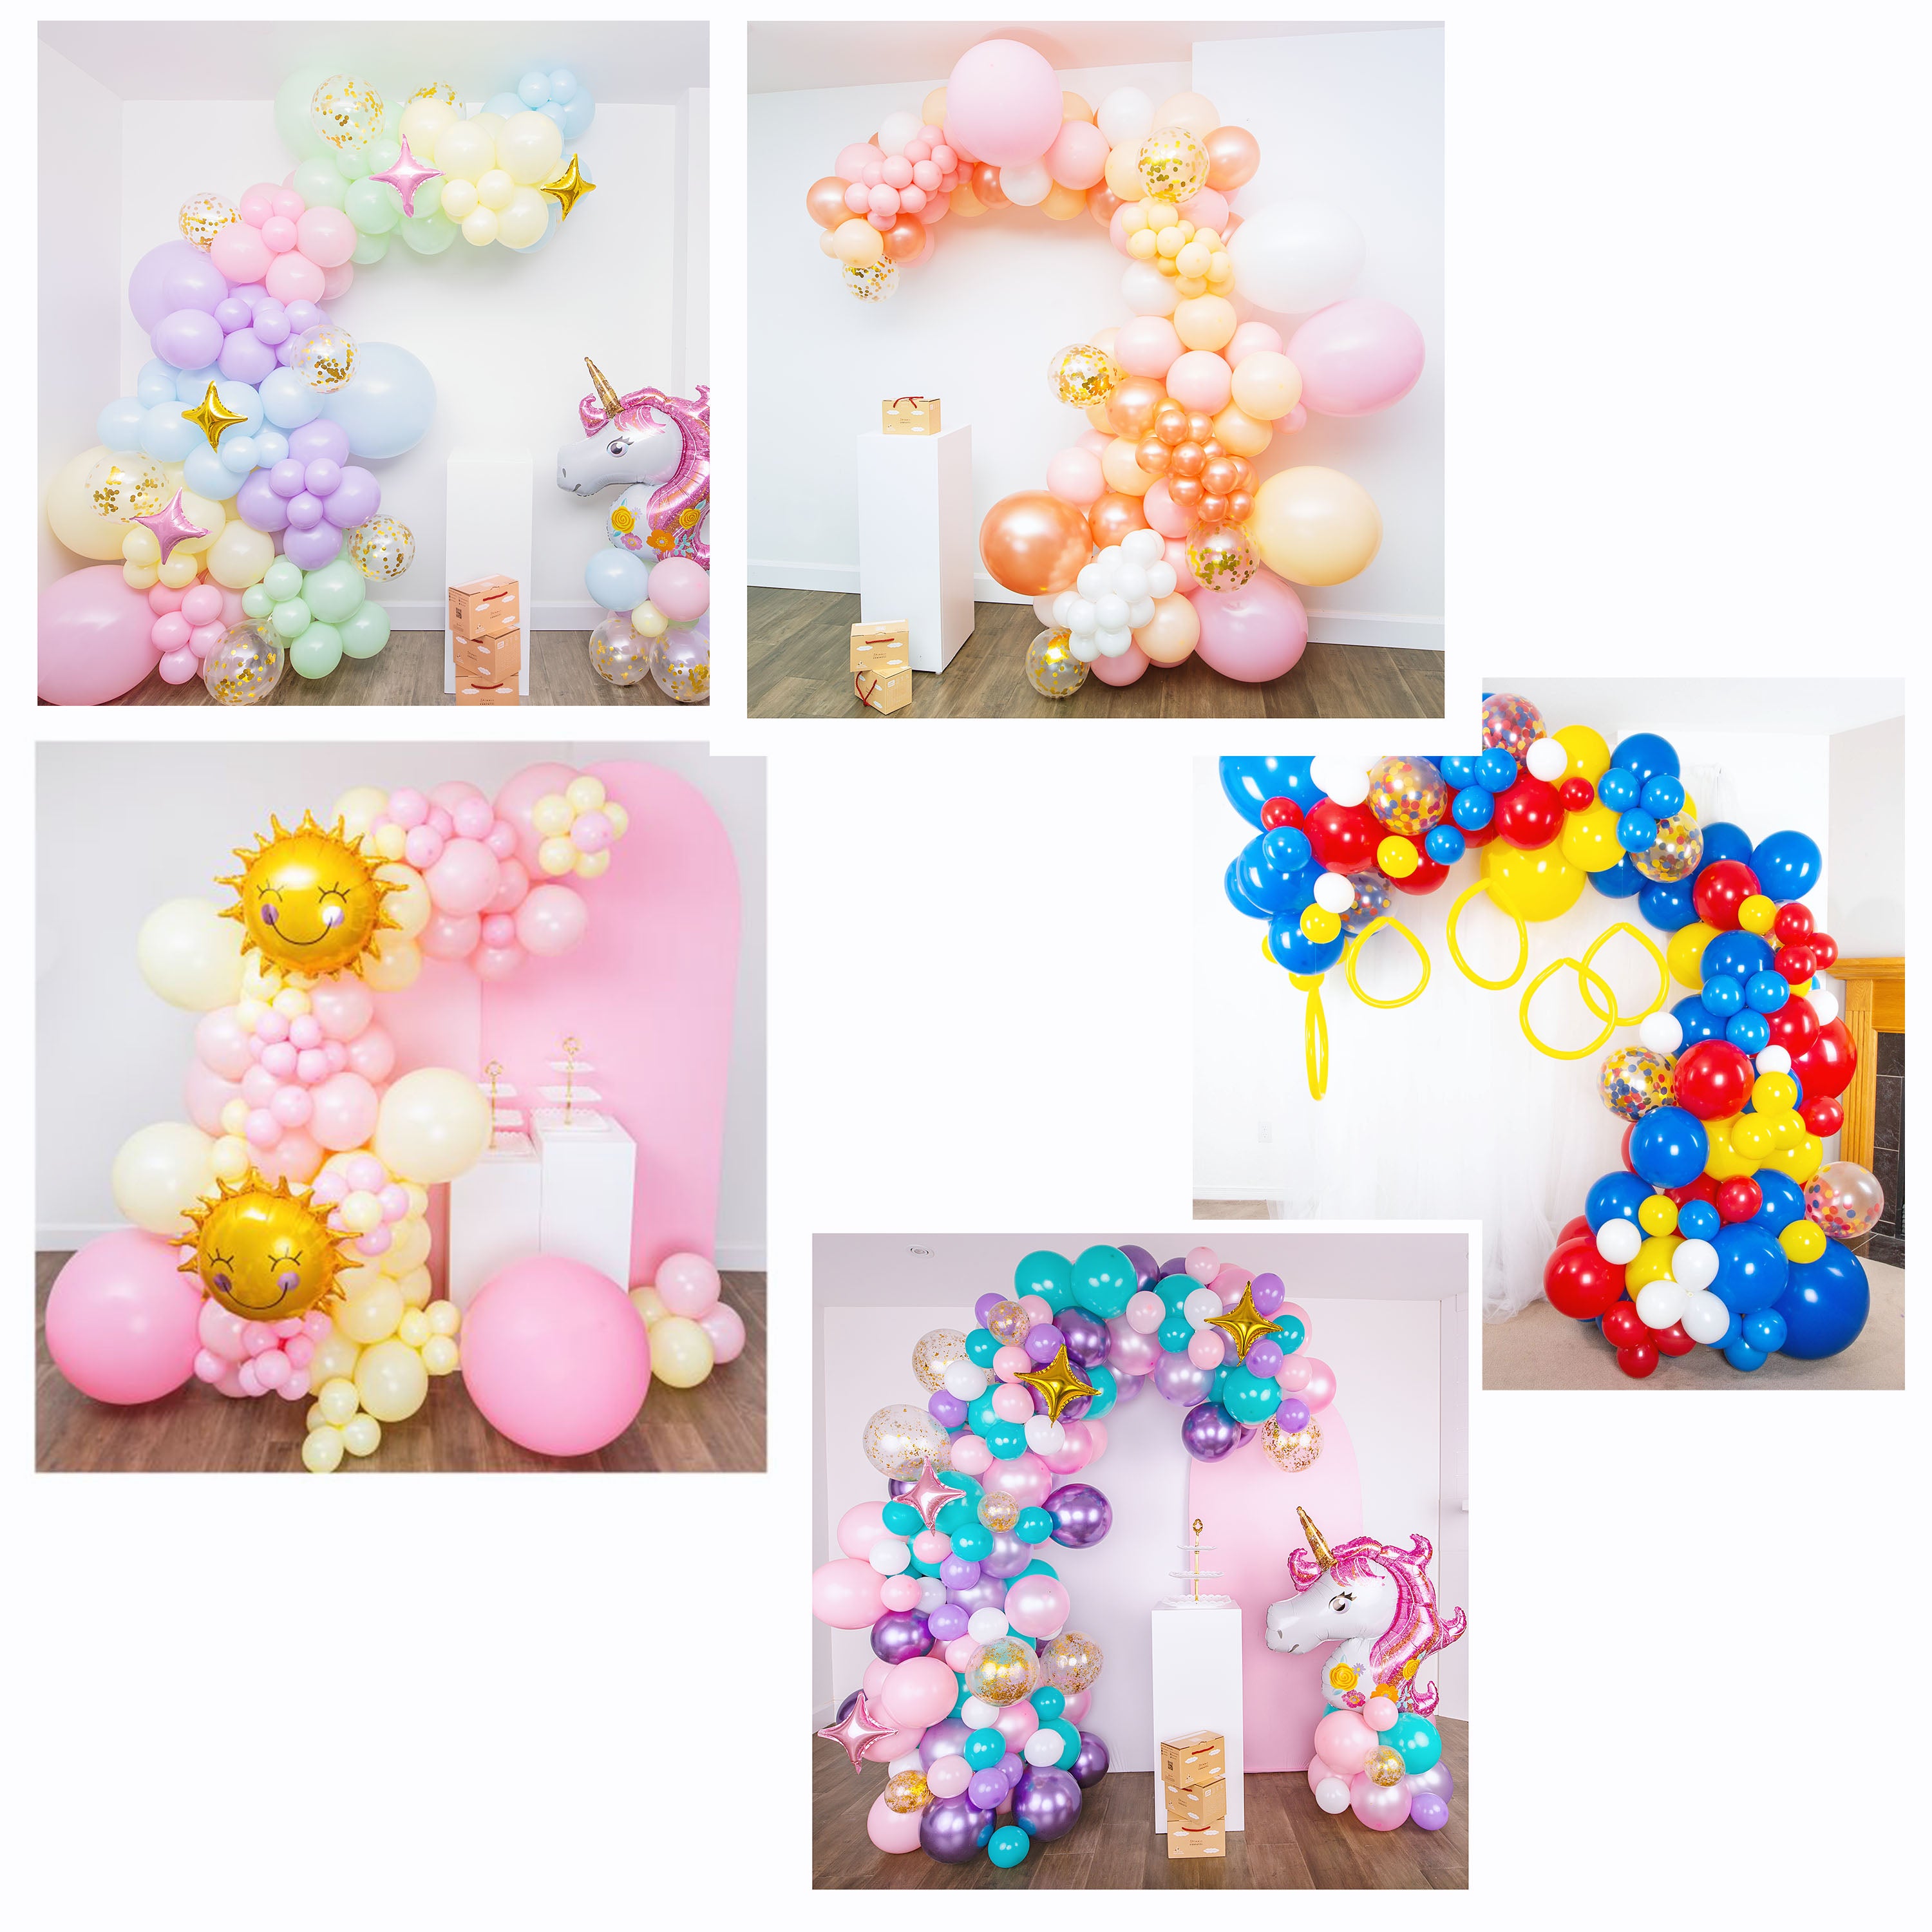 examples of balloon garlands by shimmer and confetti